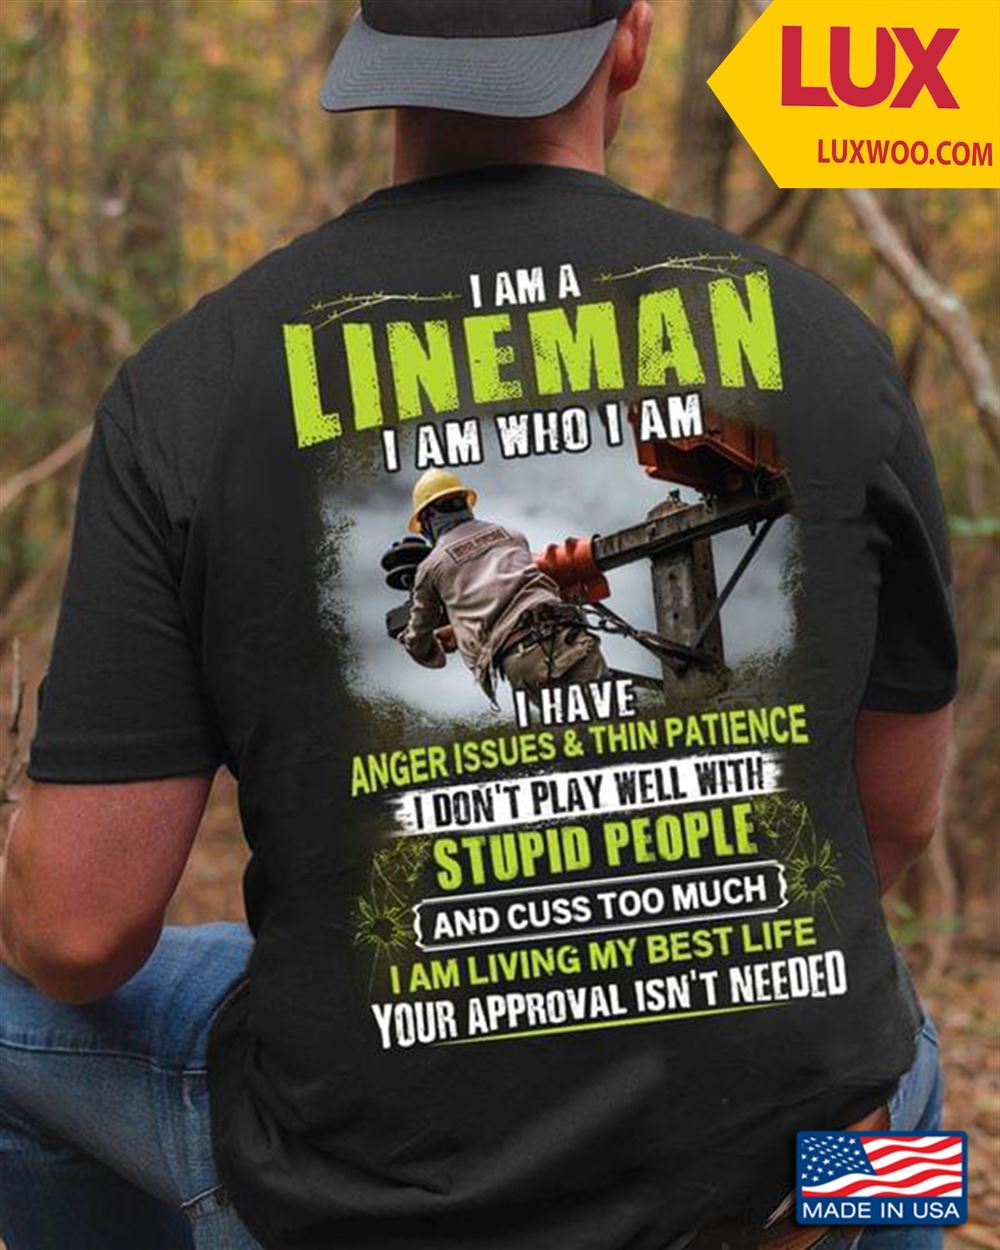 I Am A Lineman I Am Who I Am I Have Anger Issues And Thin Patience I Dont Play Well Tshirt Size Up To 5xl